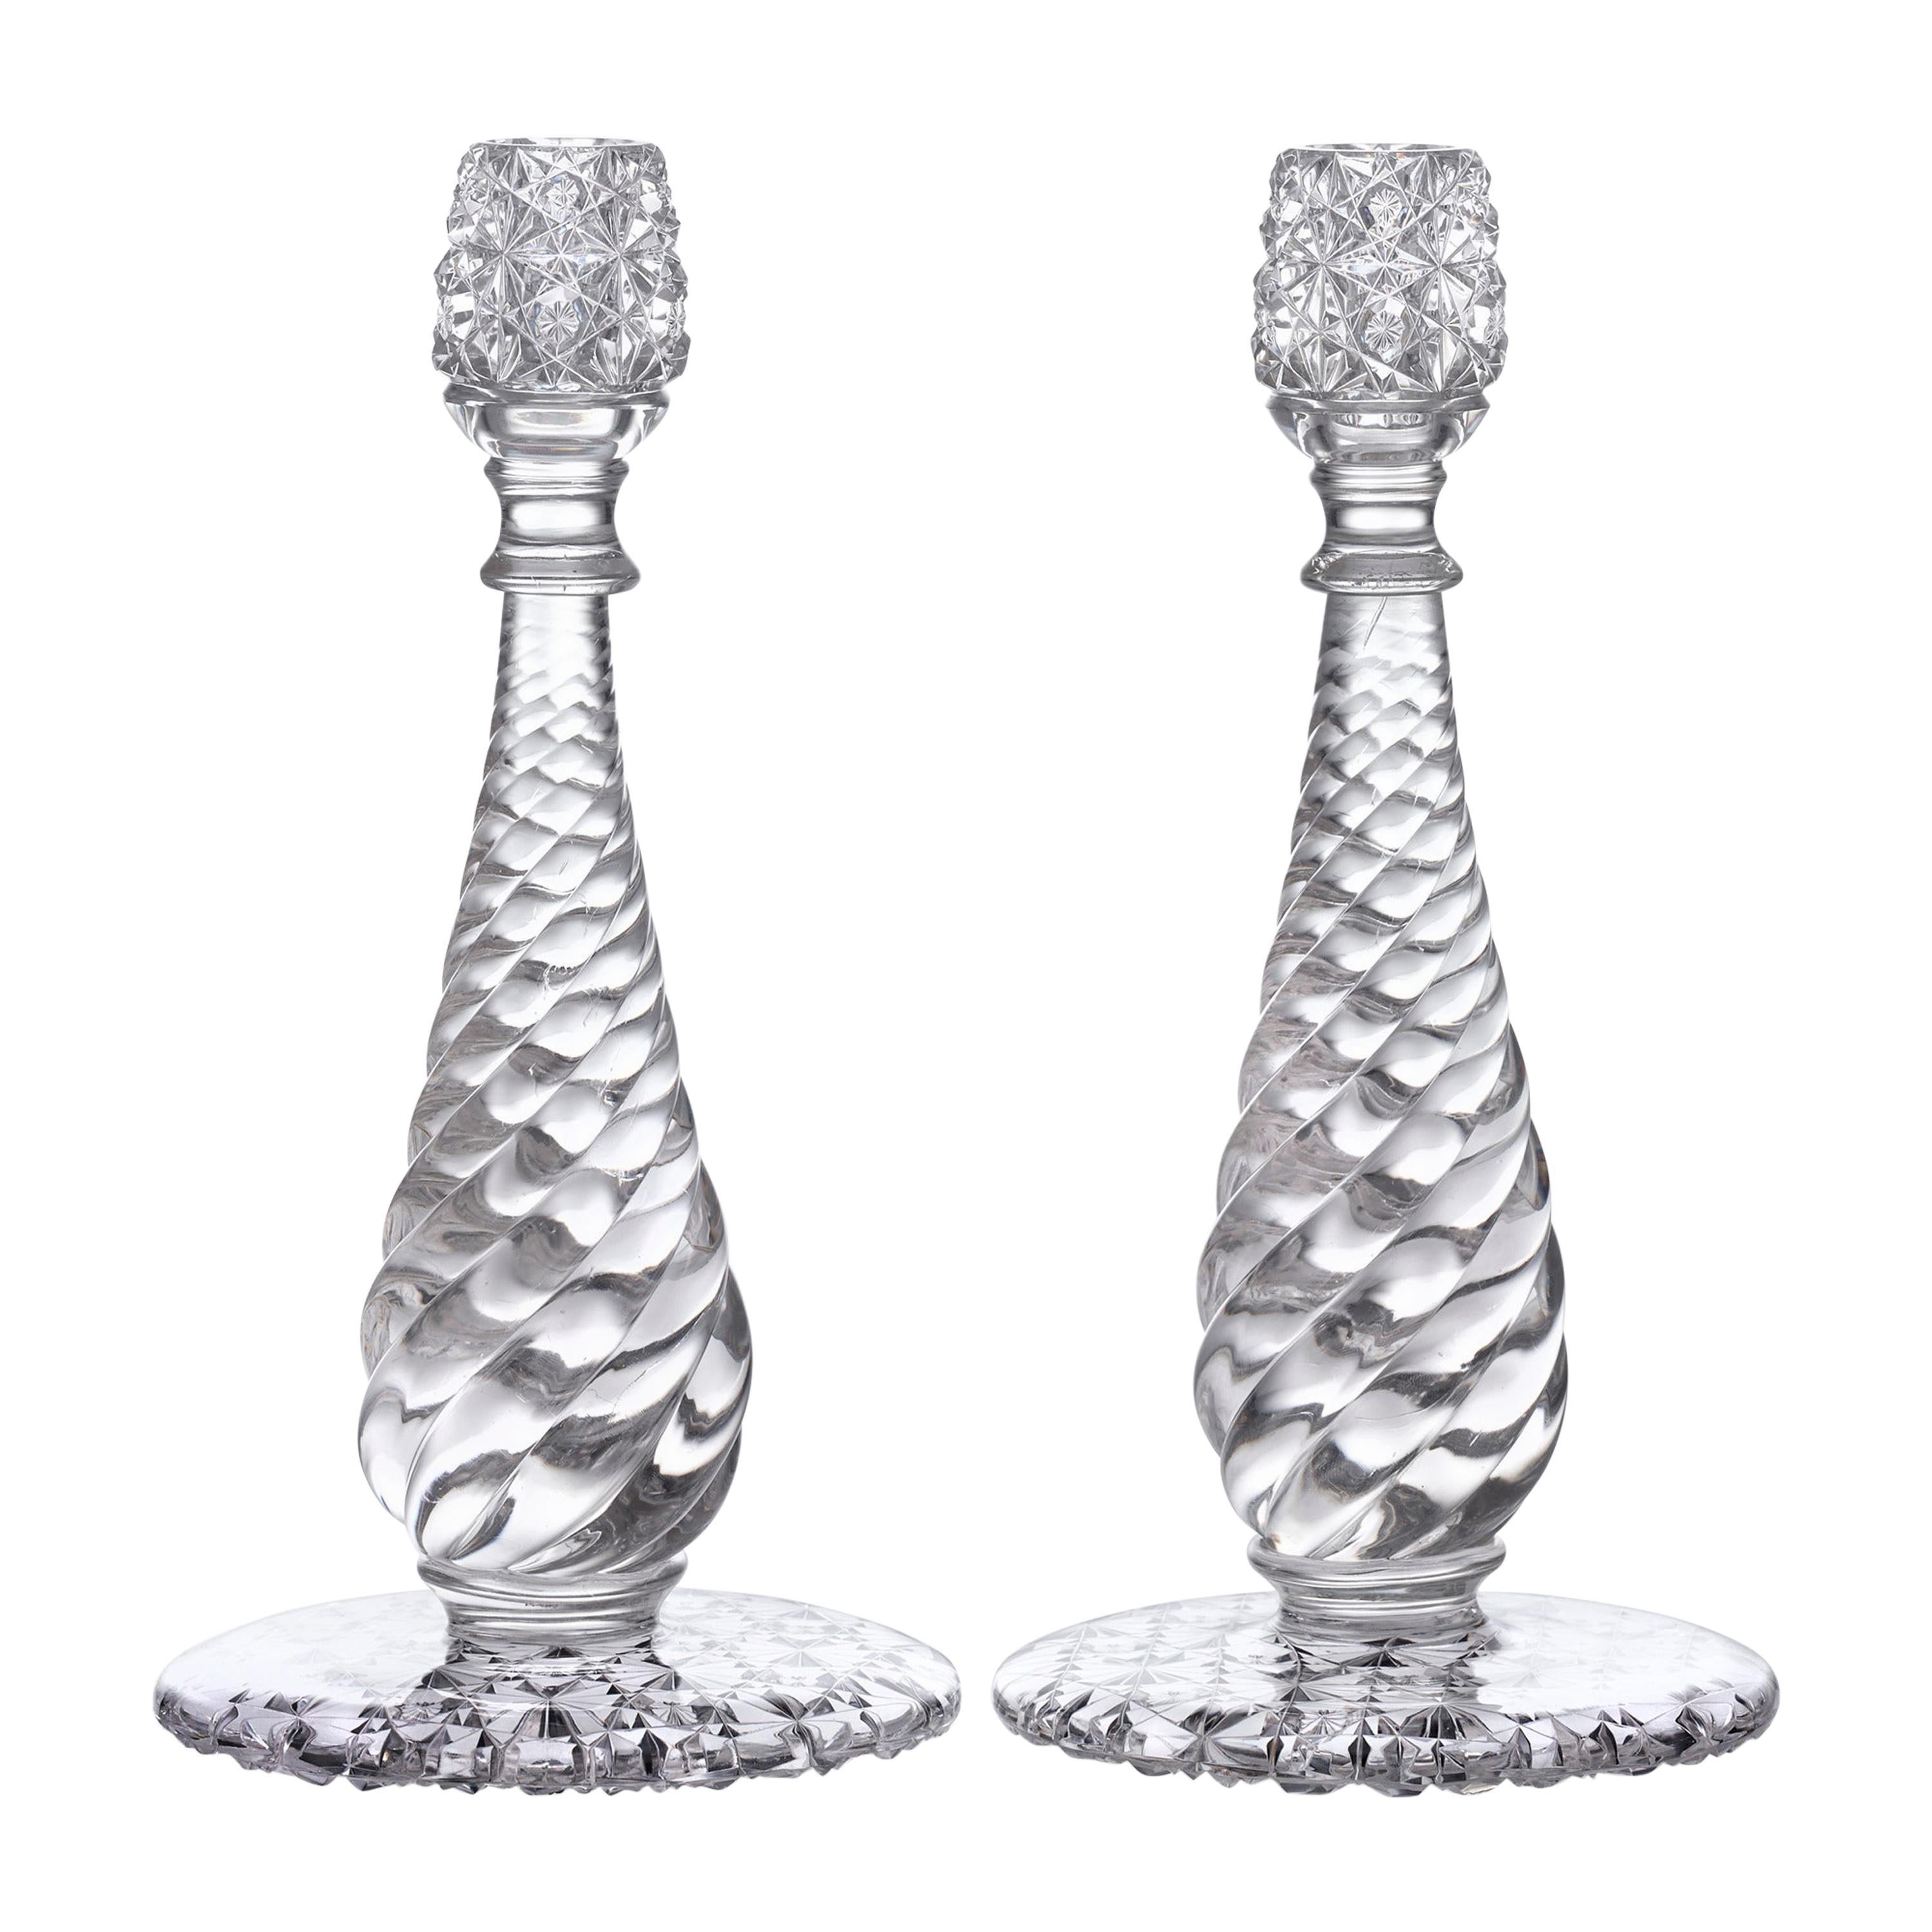 Russian and Swirl Pattern Cut Glass Candlesticks For Sale